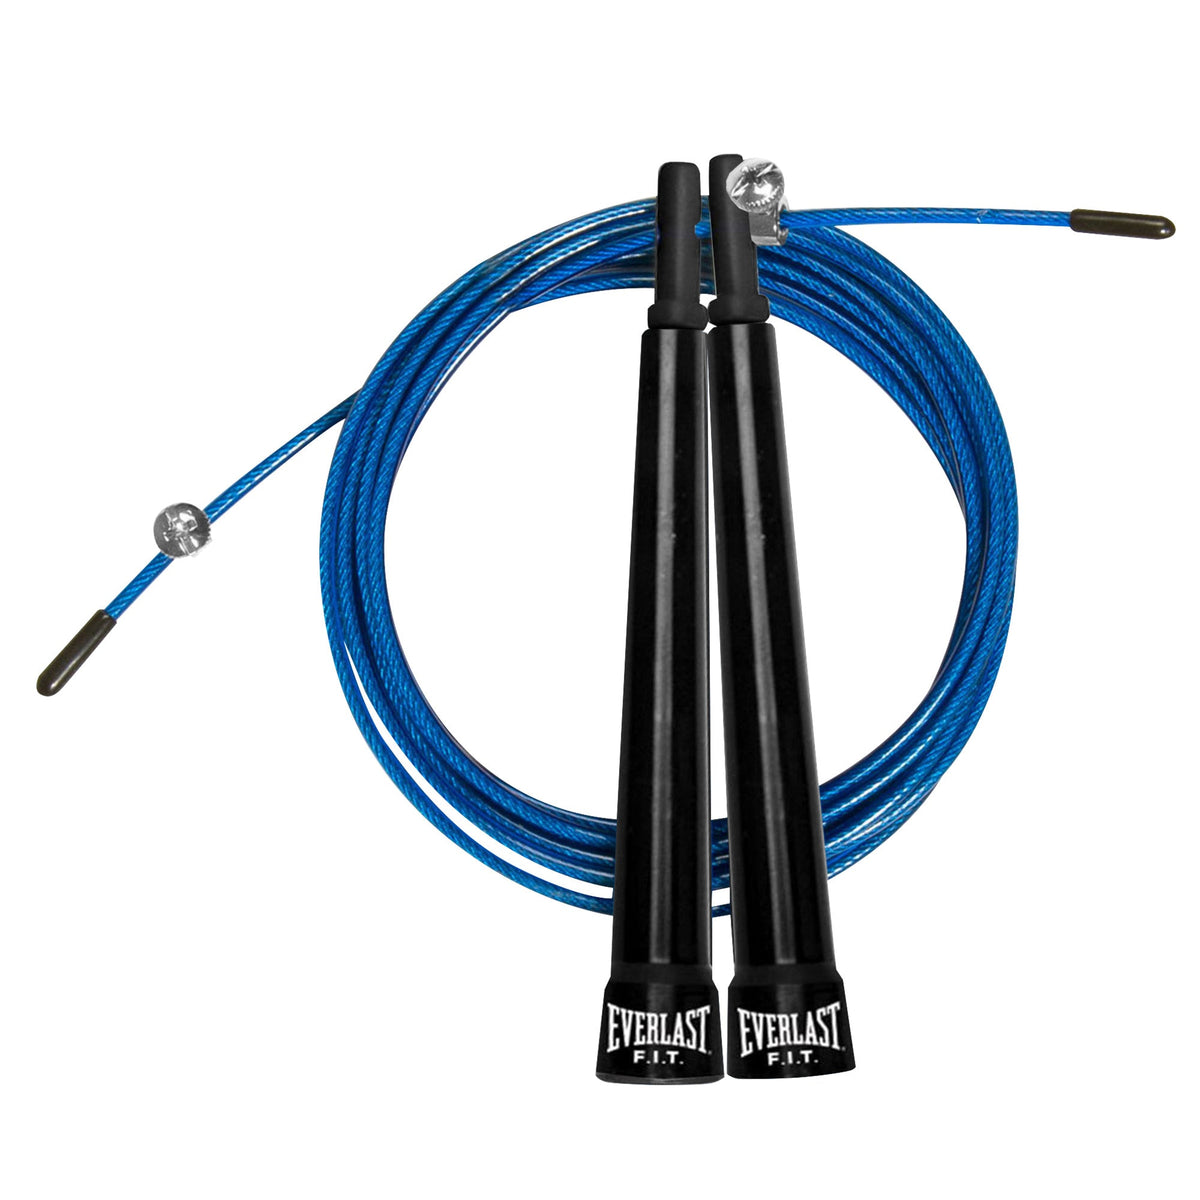 Hoplynn, Other, Ec0 Electric Jump Rope